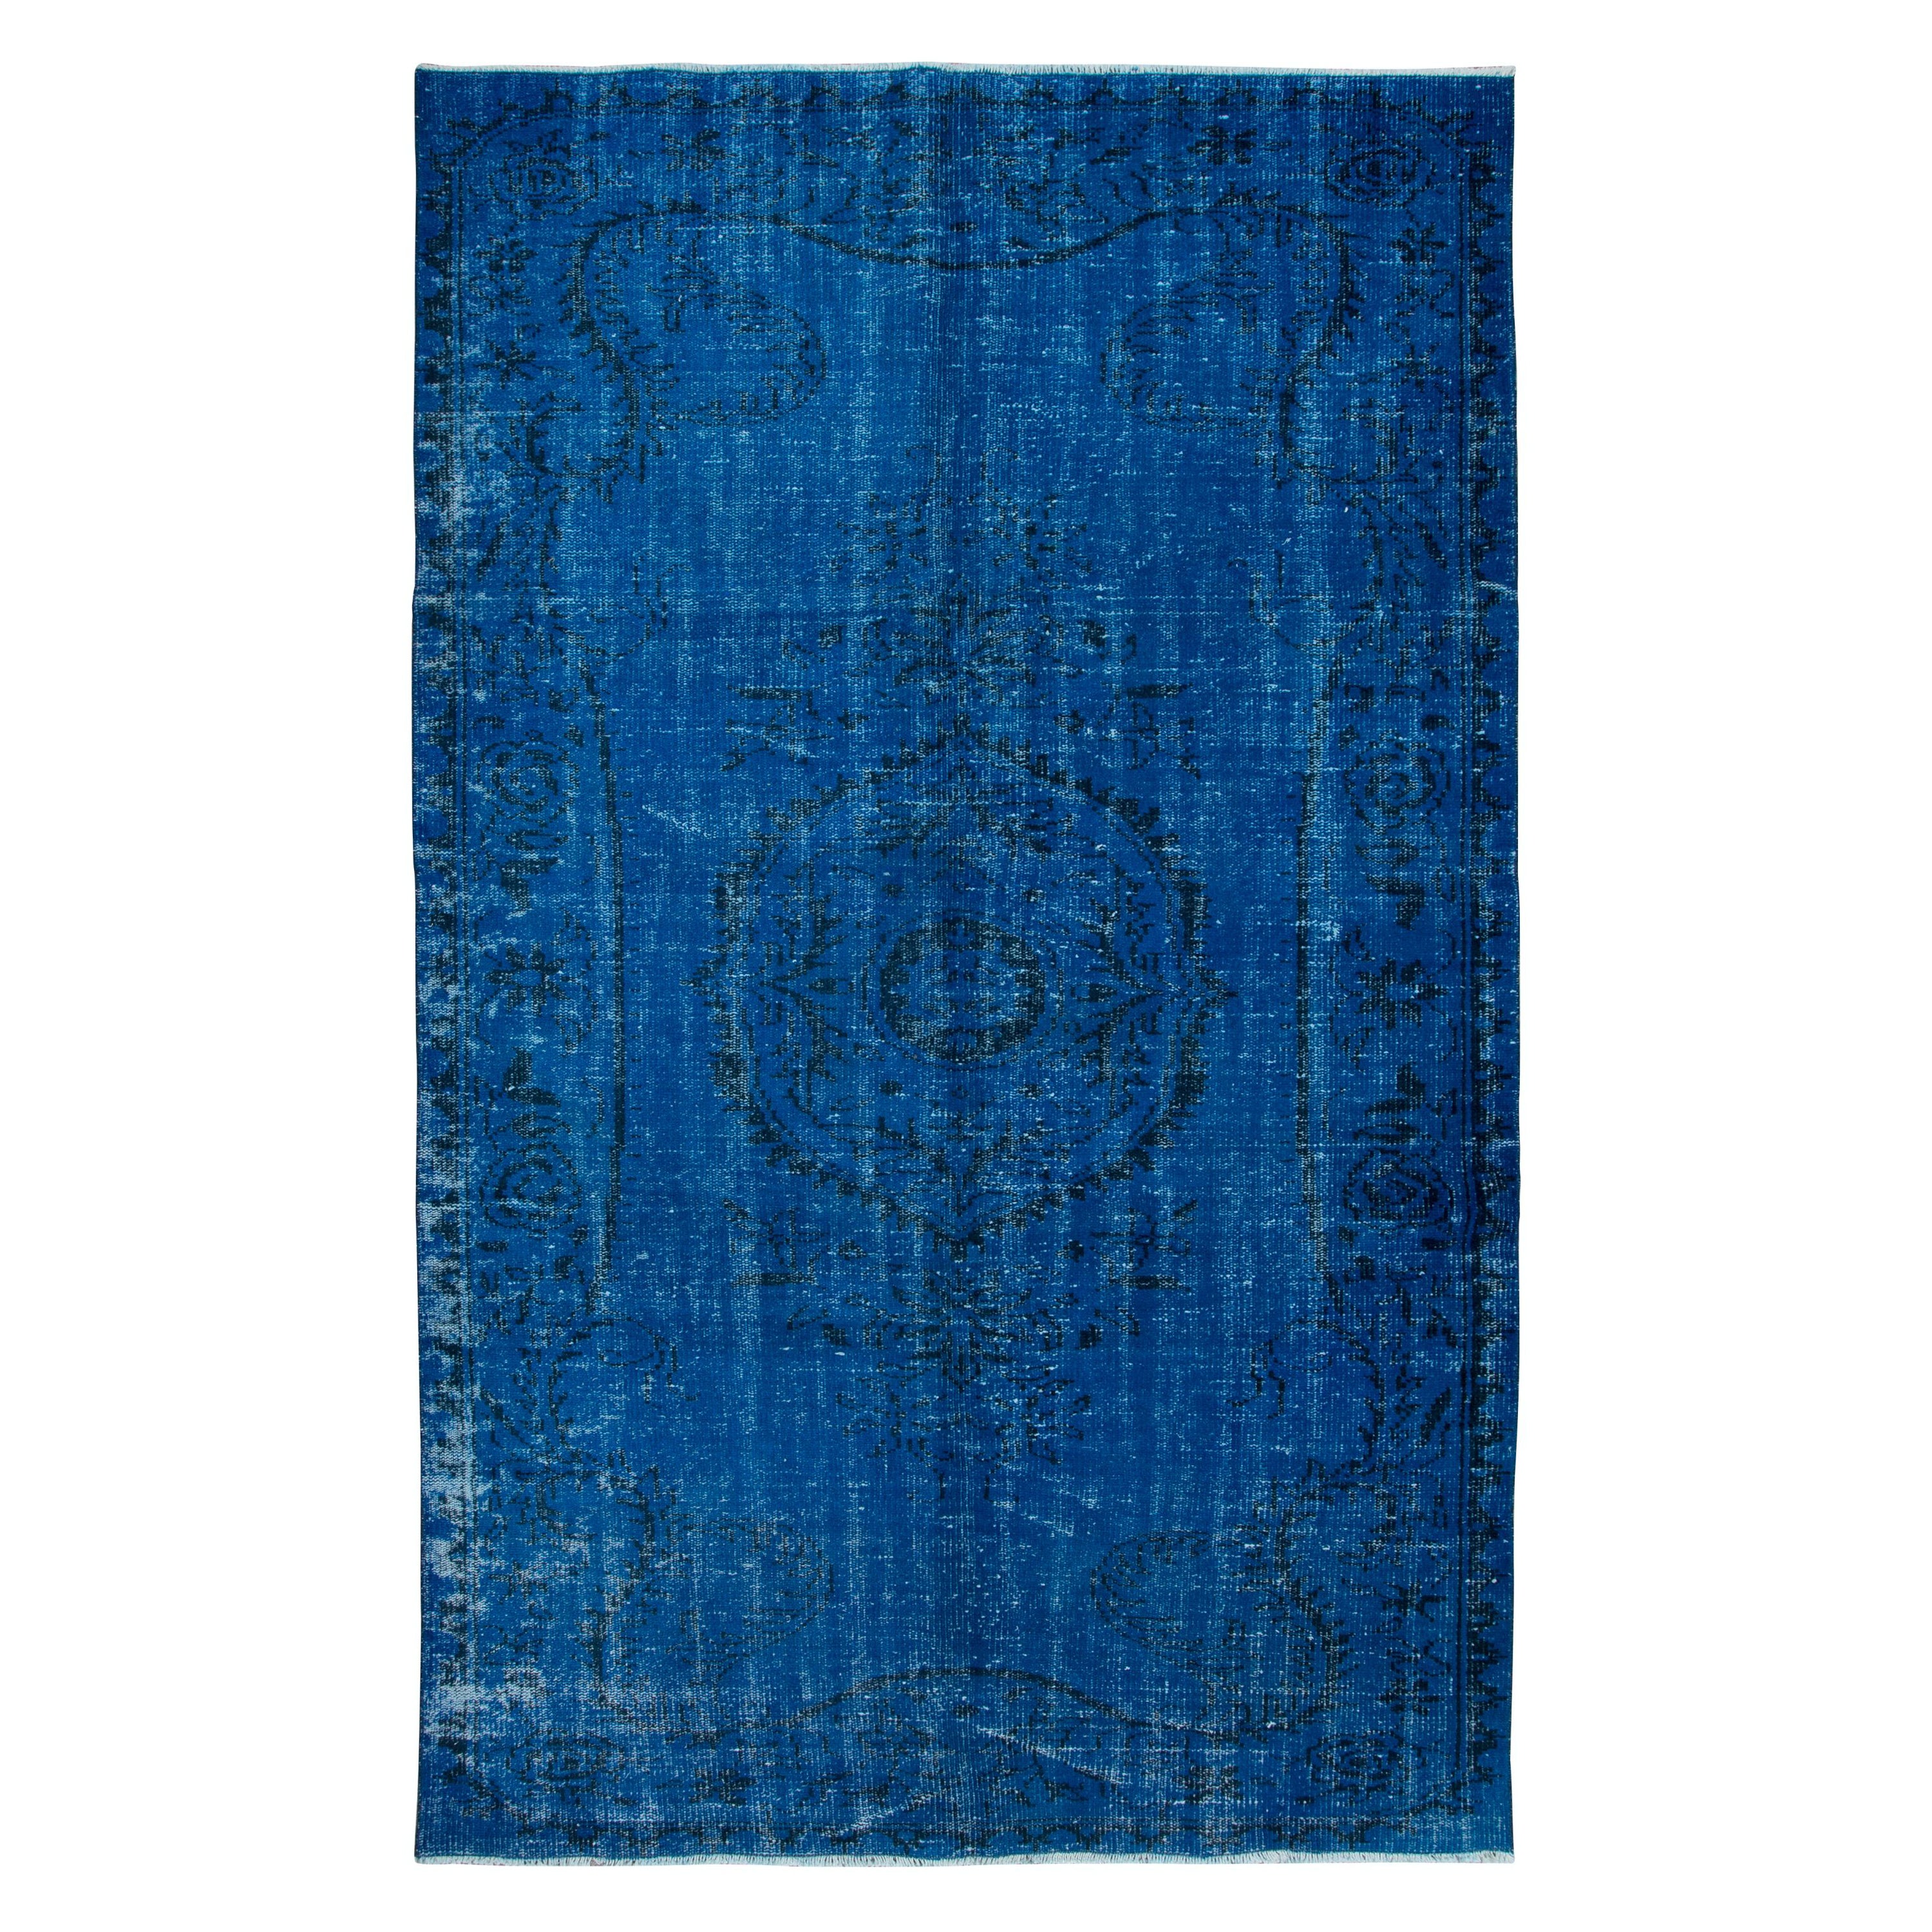 5.5x9 Ft Blue Overdyed Wool Area Rug, Handmade in Turkey, Modern Upcycled Carpet For Sale